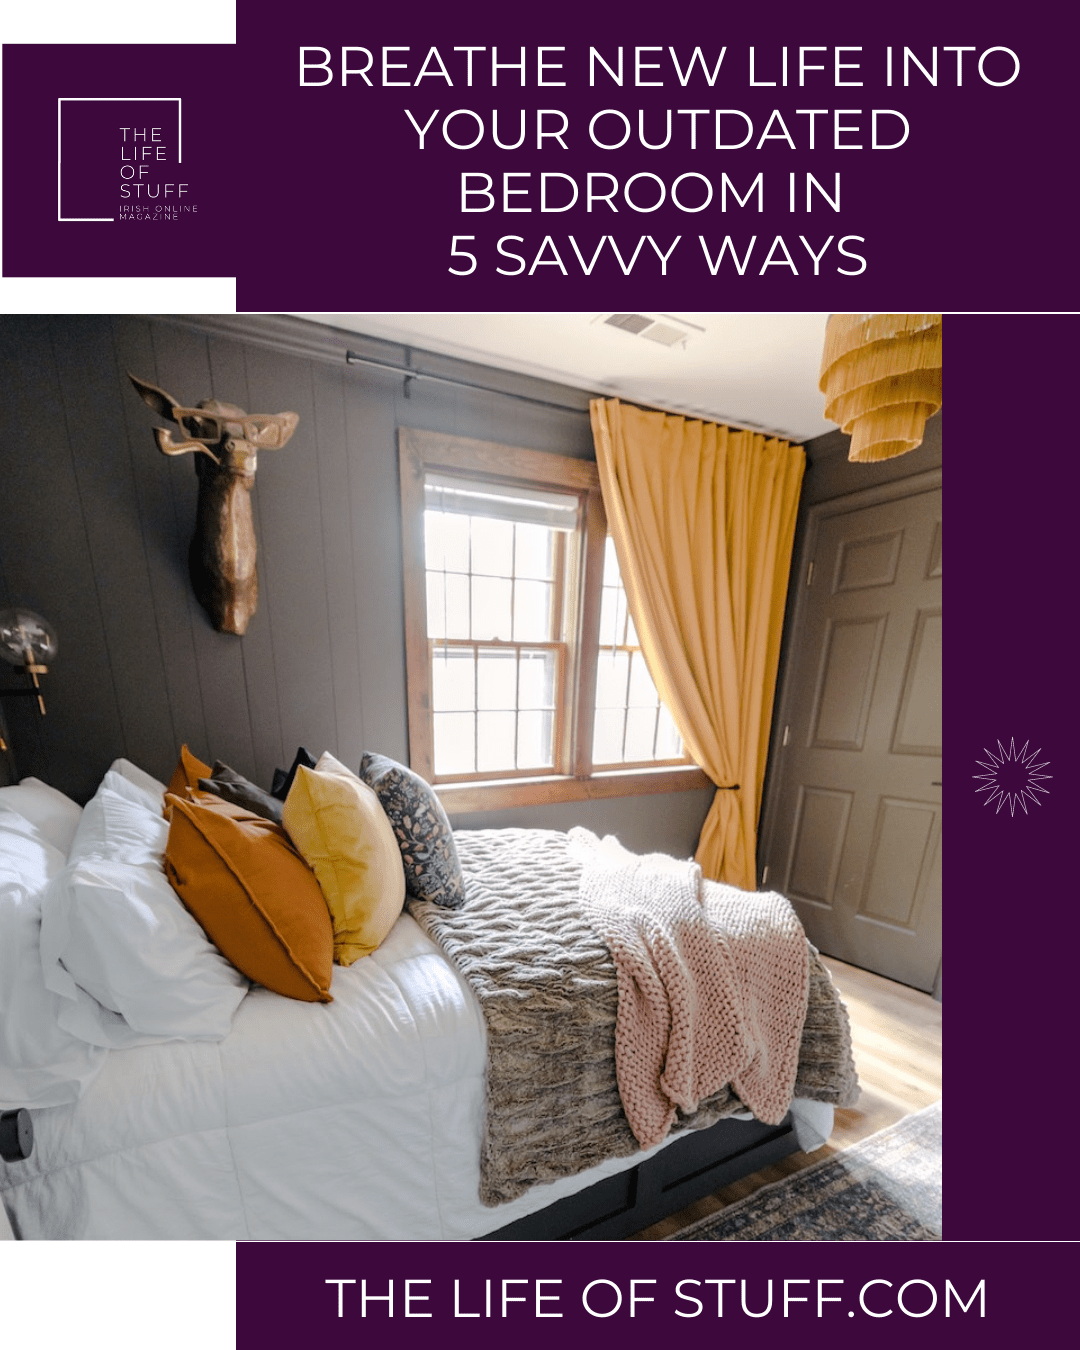 Breathe New Life Into Your Outdated Bedroom in 5 Savvy Ways - The Life of Stuff